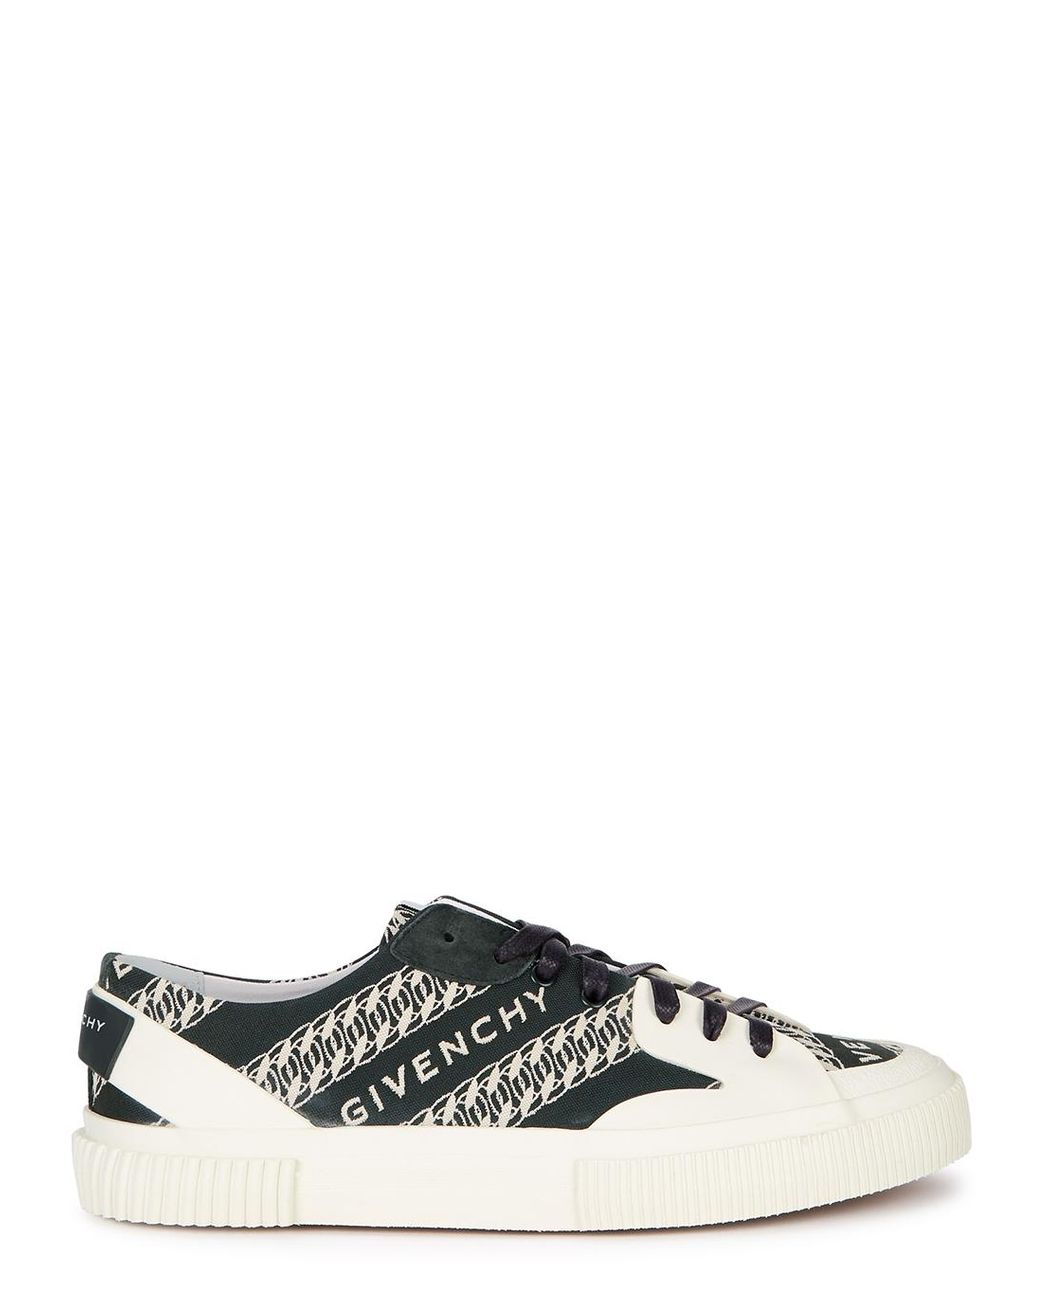 Givenchy Tennis Logo-intarsia Canvas Sneakers in Navy (Blue) for Men - Lyst